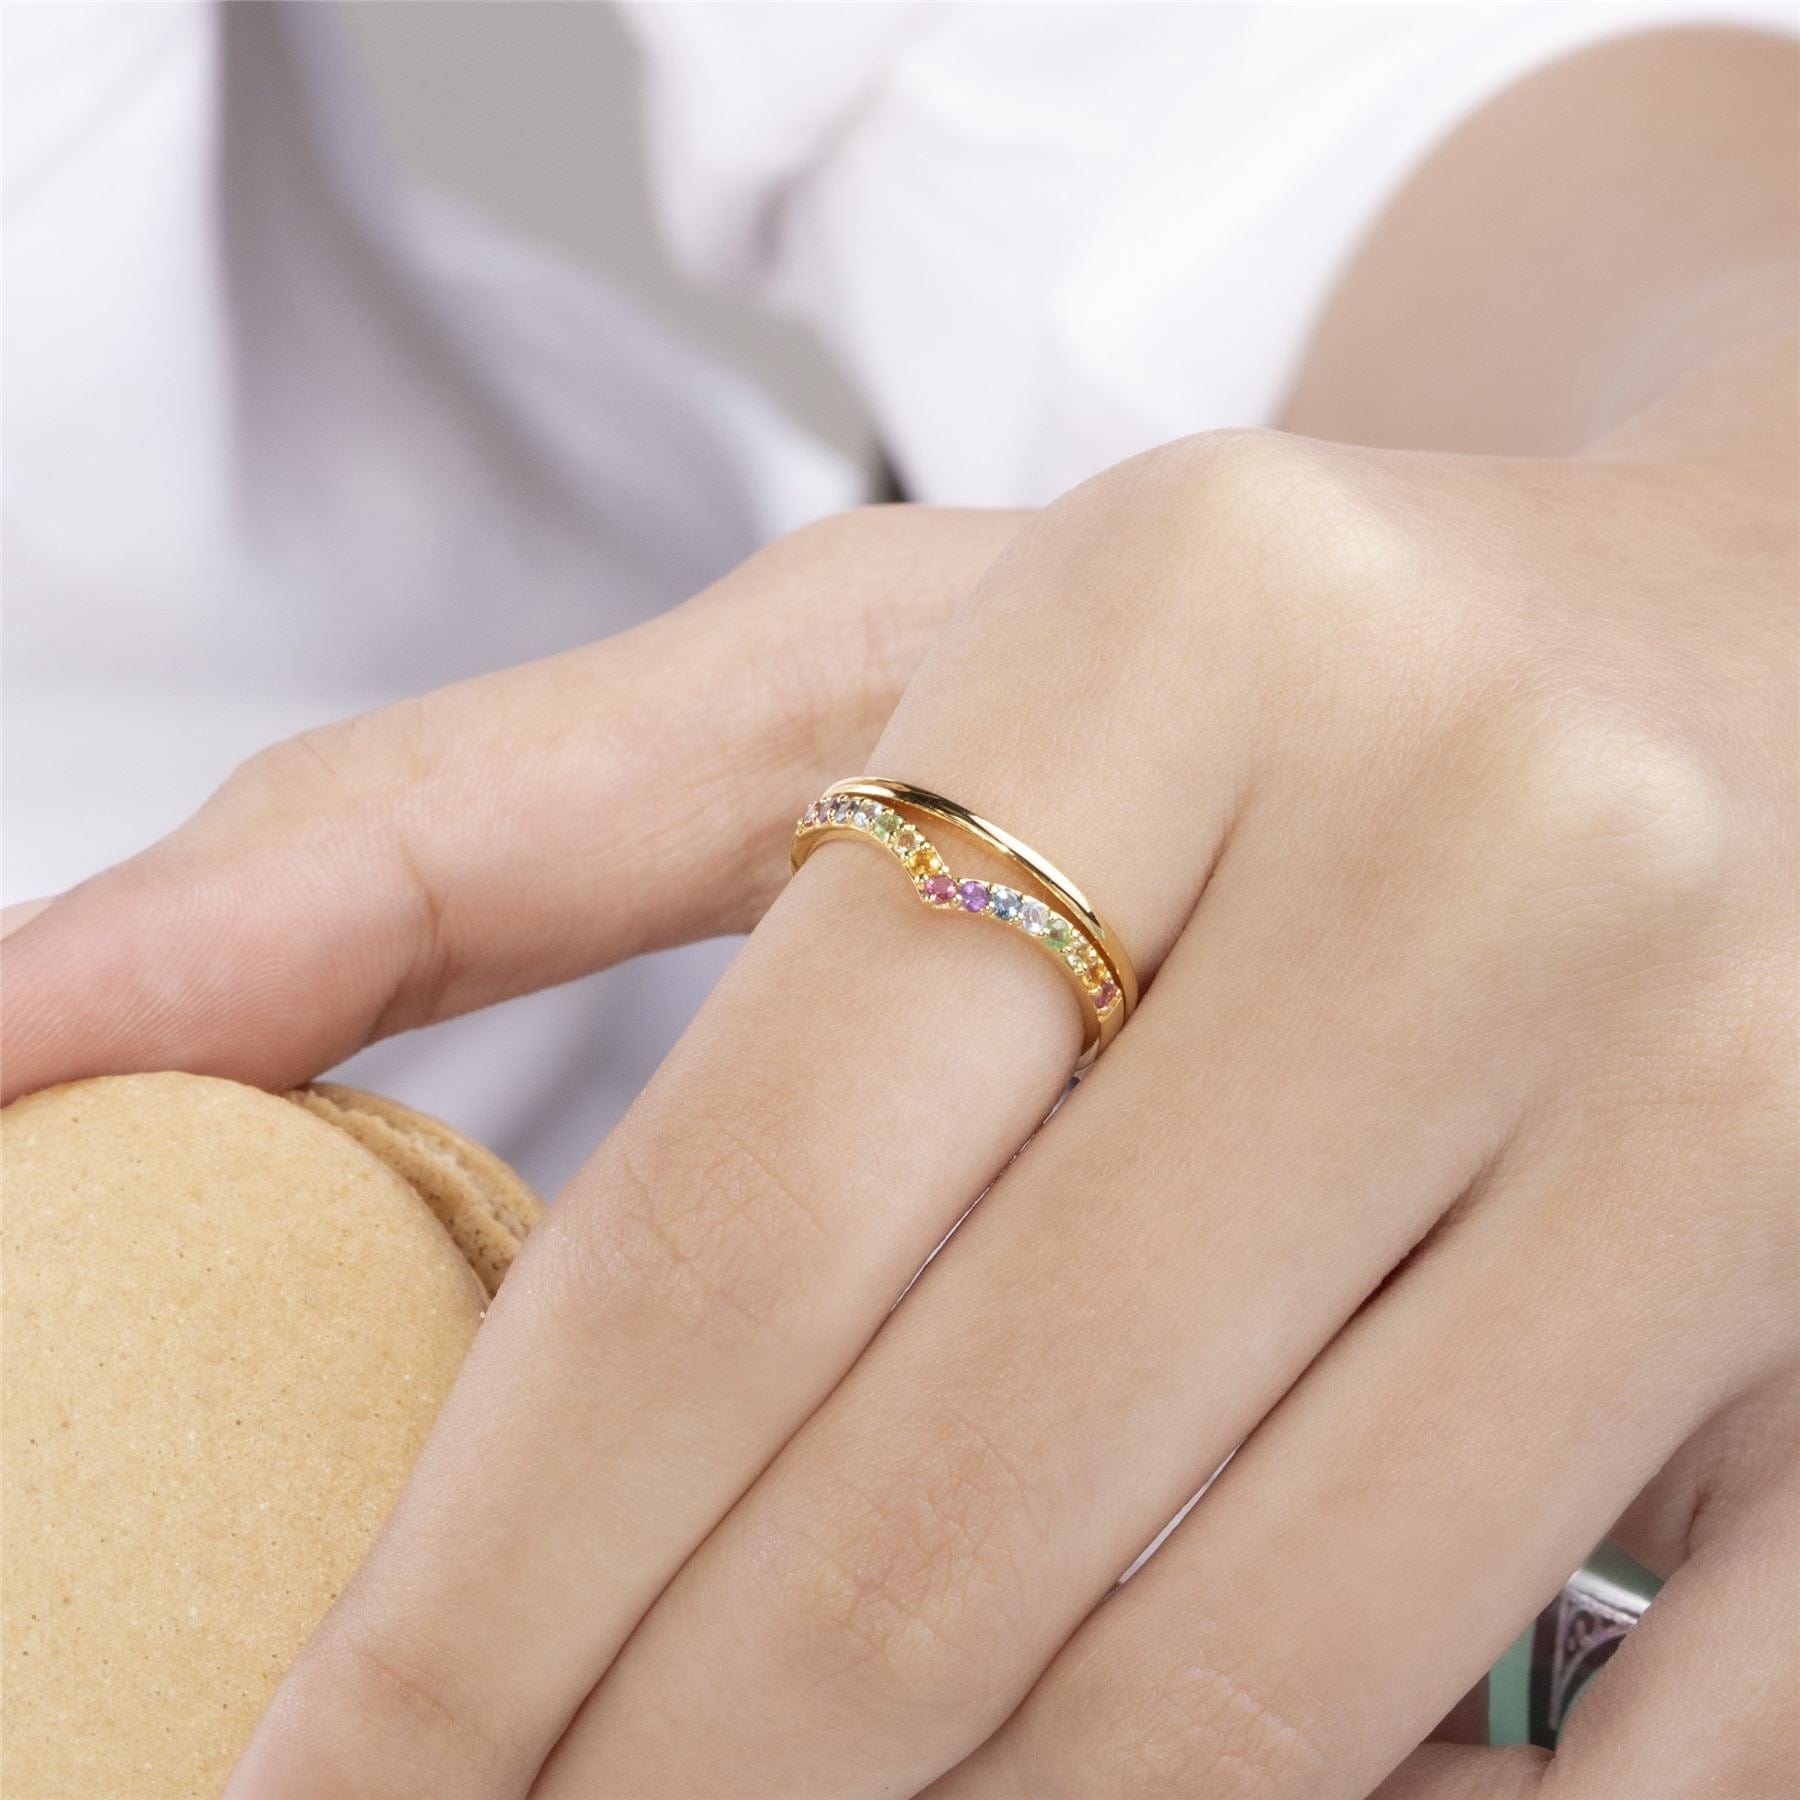 Rainbow Wishbone Style Ring in Gold Plated Sterling Silver on model